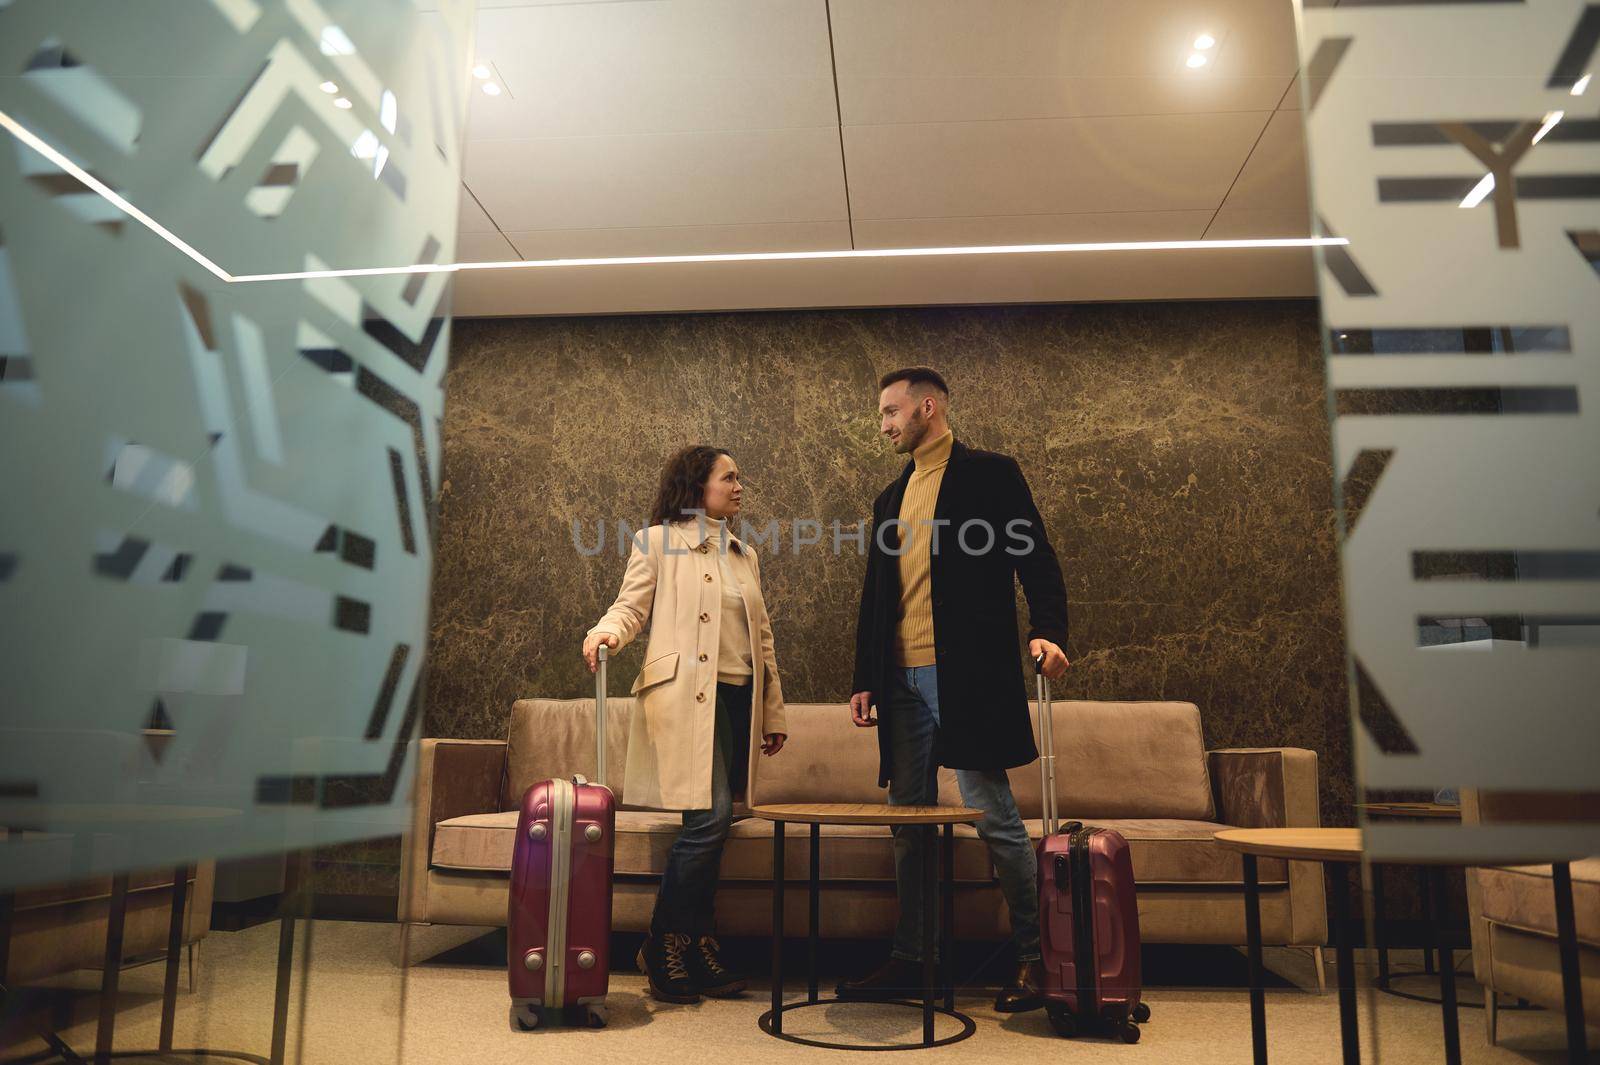 Handsome attractive businessman talking to his female business partner, standing with suitcase at the exit from the conference room in the airport departure terminal ready to board the flight together by artgf